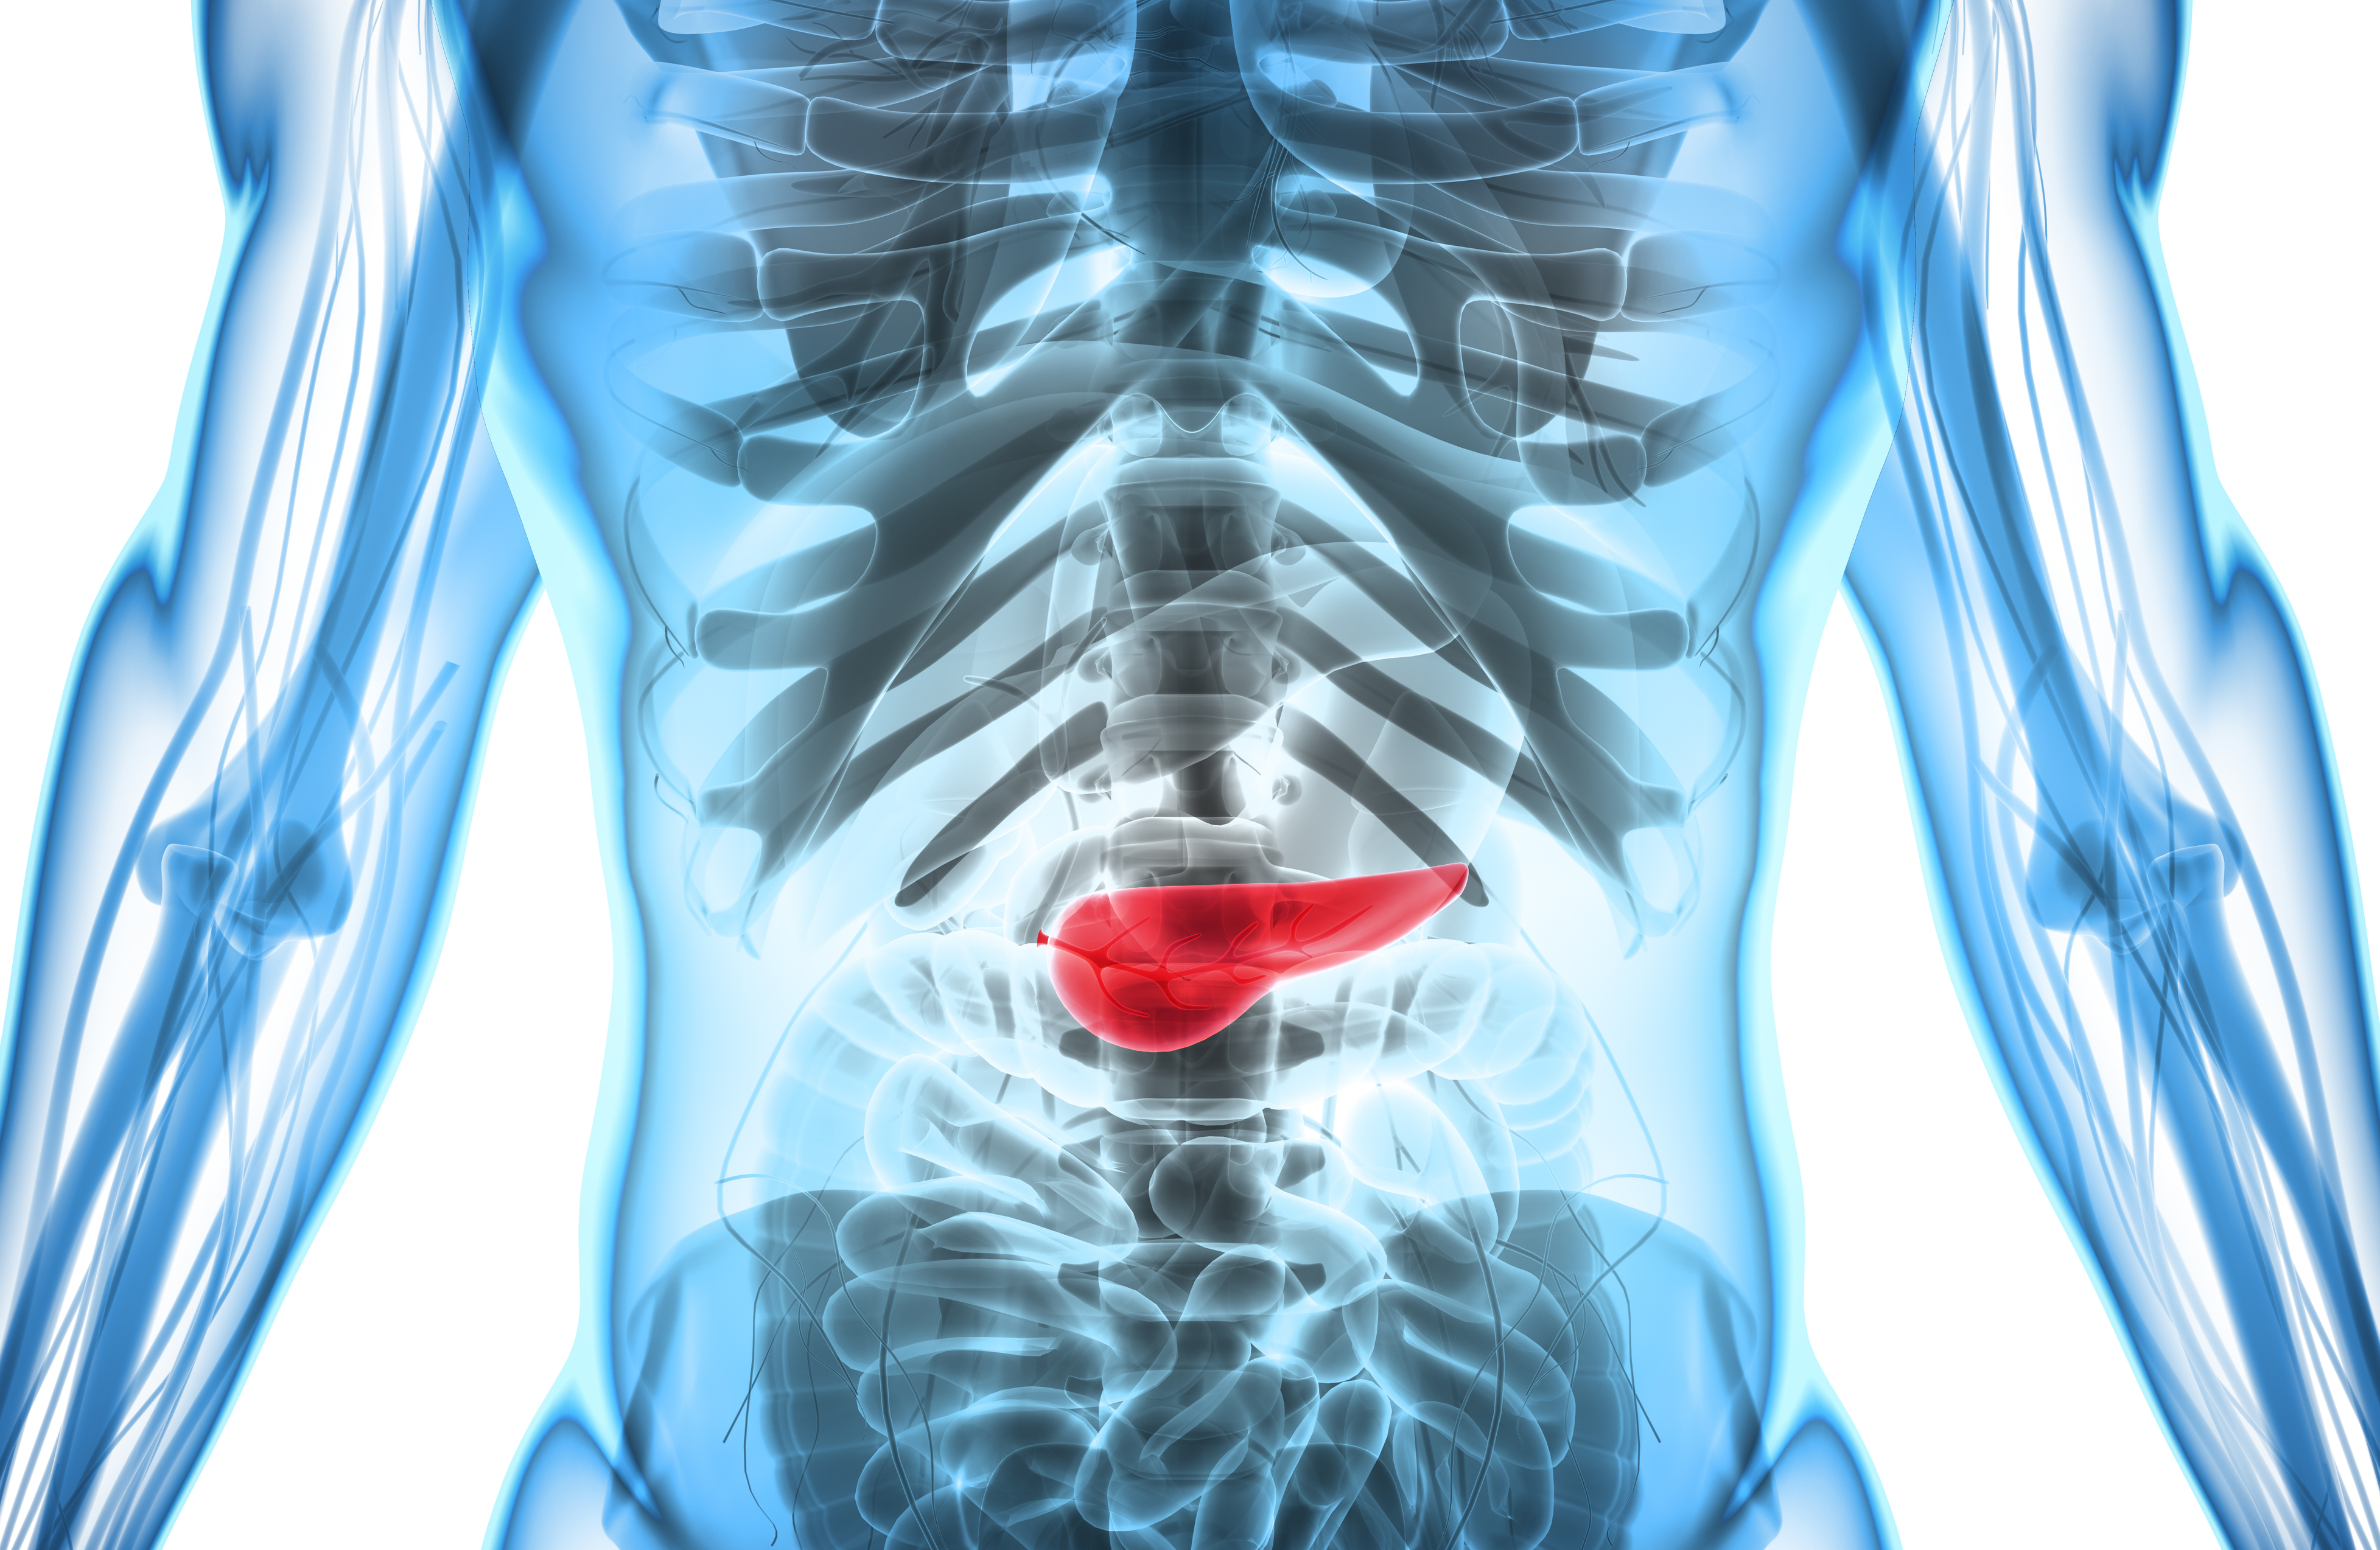 3d illustration of pancreas - part of digestive system.